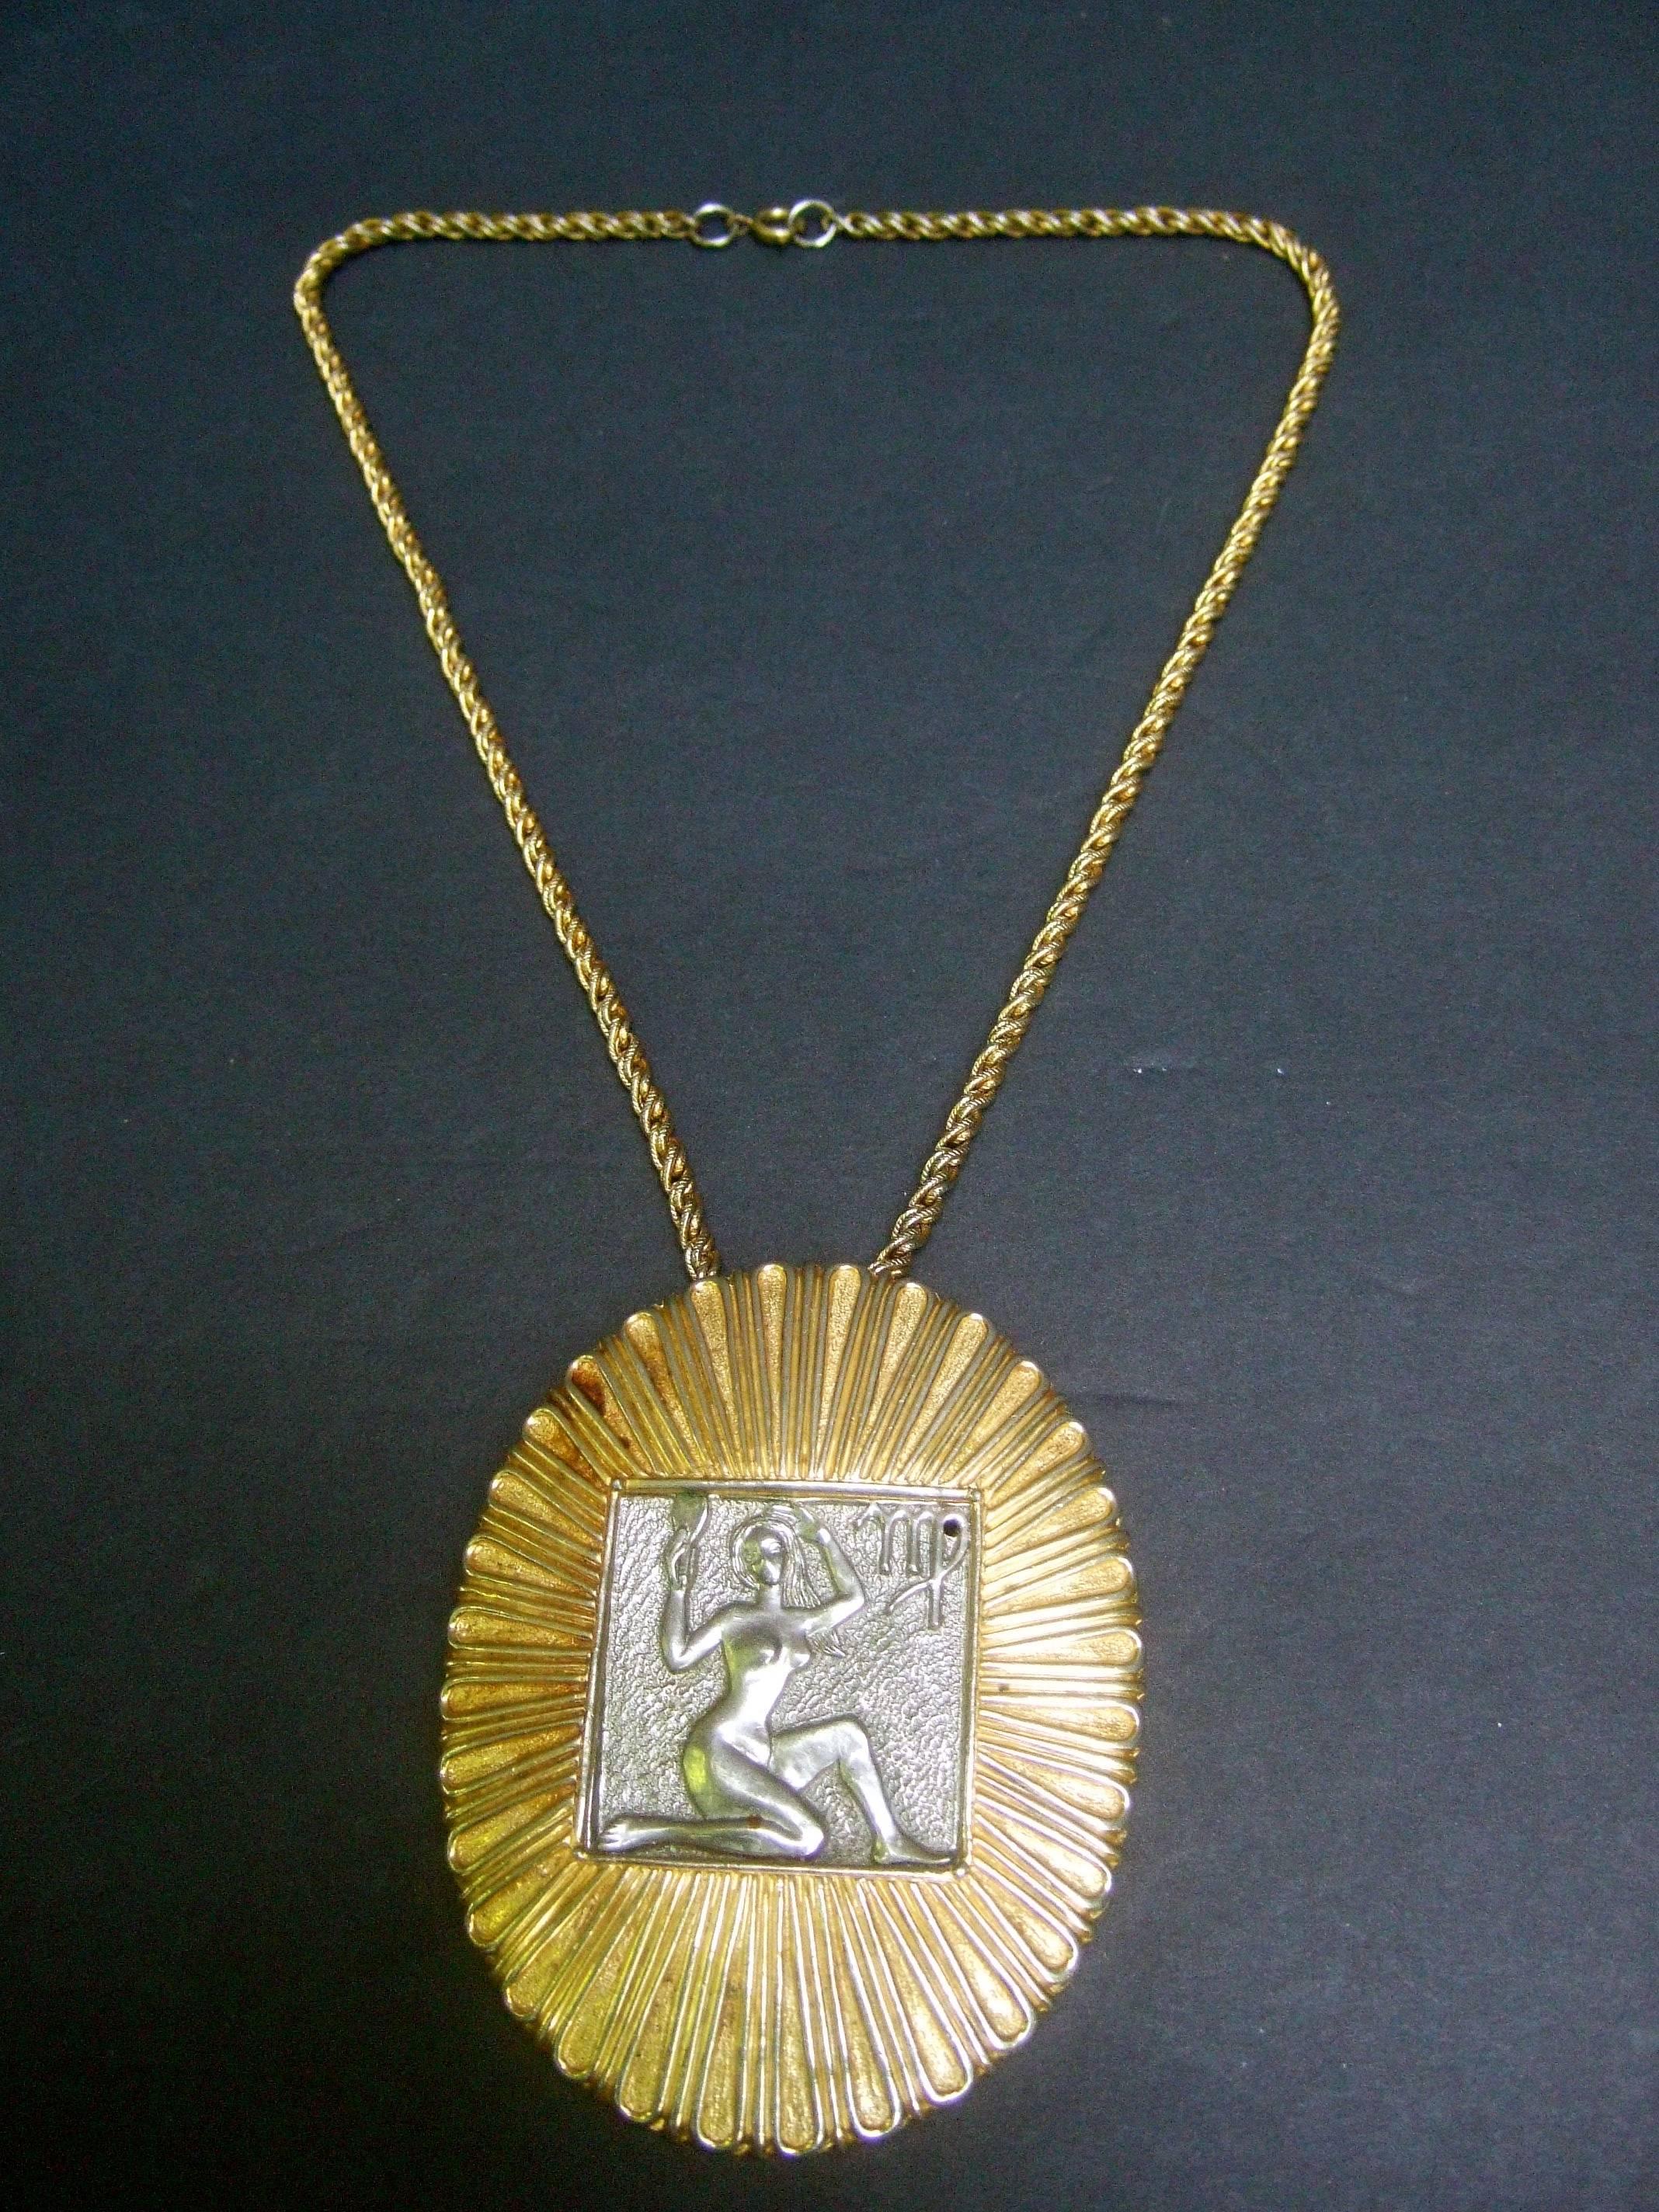 Judith Leiber Figural woman pendant necklace c 1970s
The unique necklace is designed with a female 
nude figure on a silver tone metal recessed plaque 

The versatile design can also be worn as a brooch
The large scale oval shaped gilt pendant